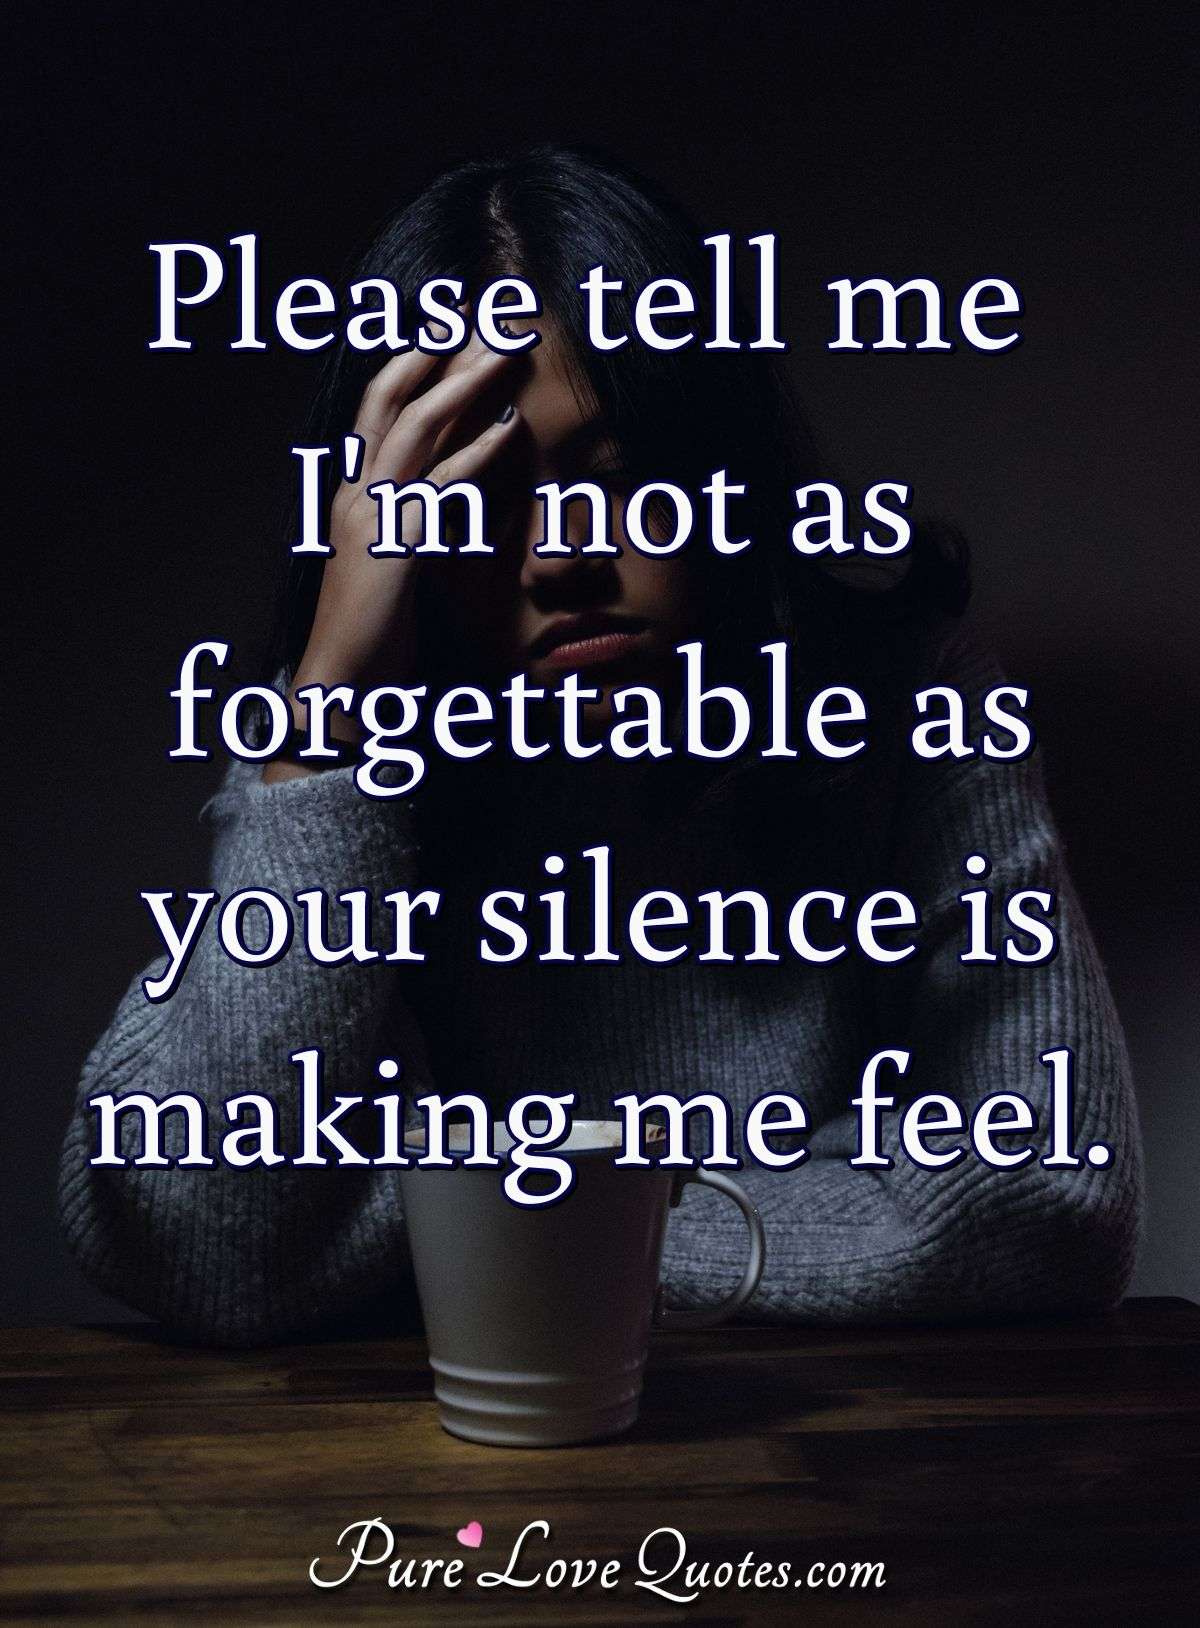 Please tell me I'm not as forgettable as your silence is making me feel. - Anonymous